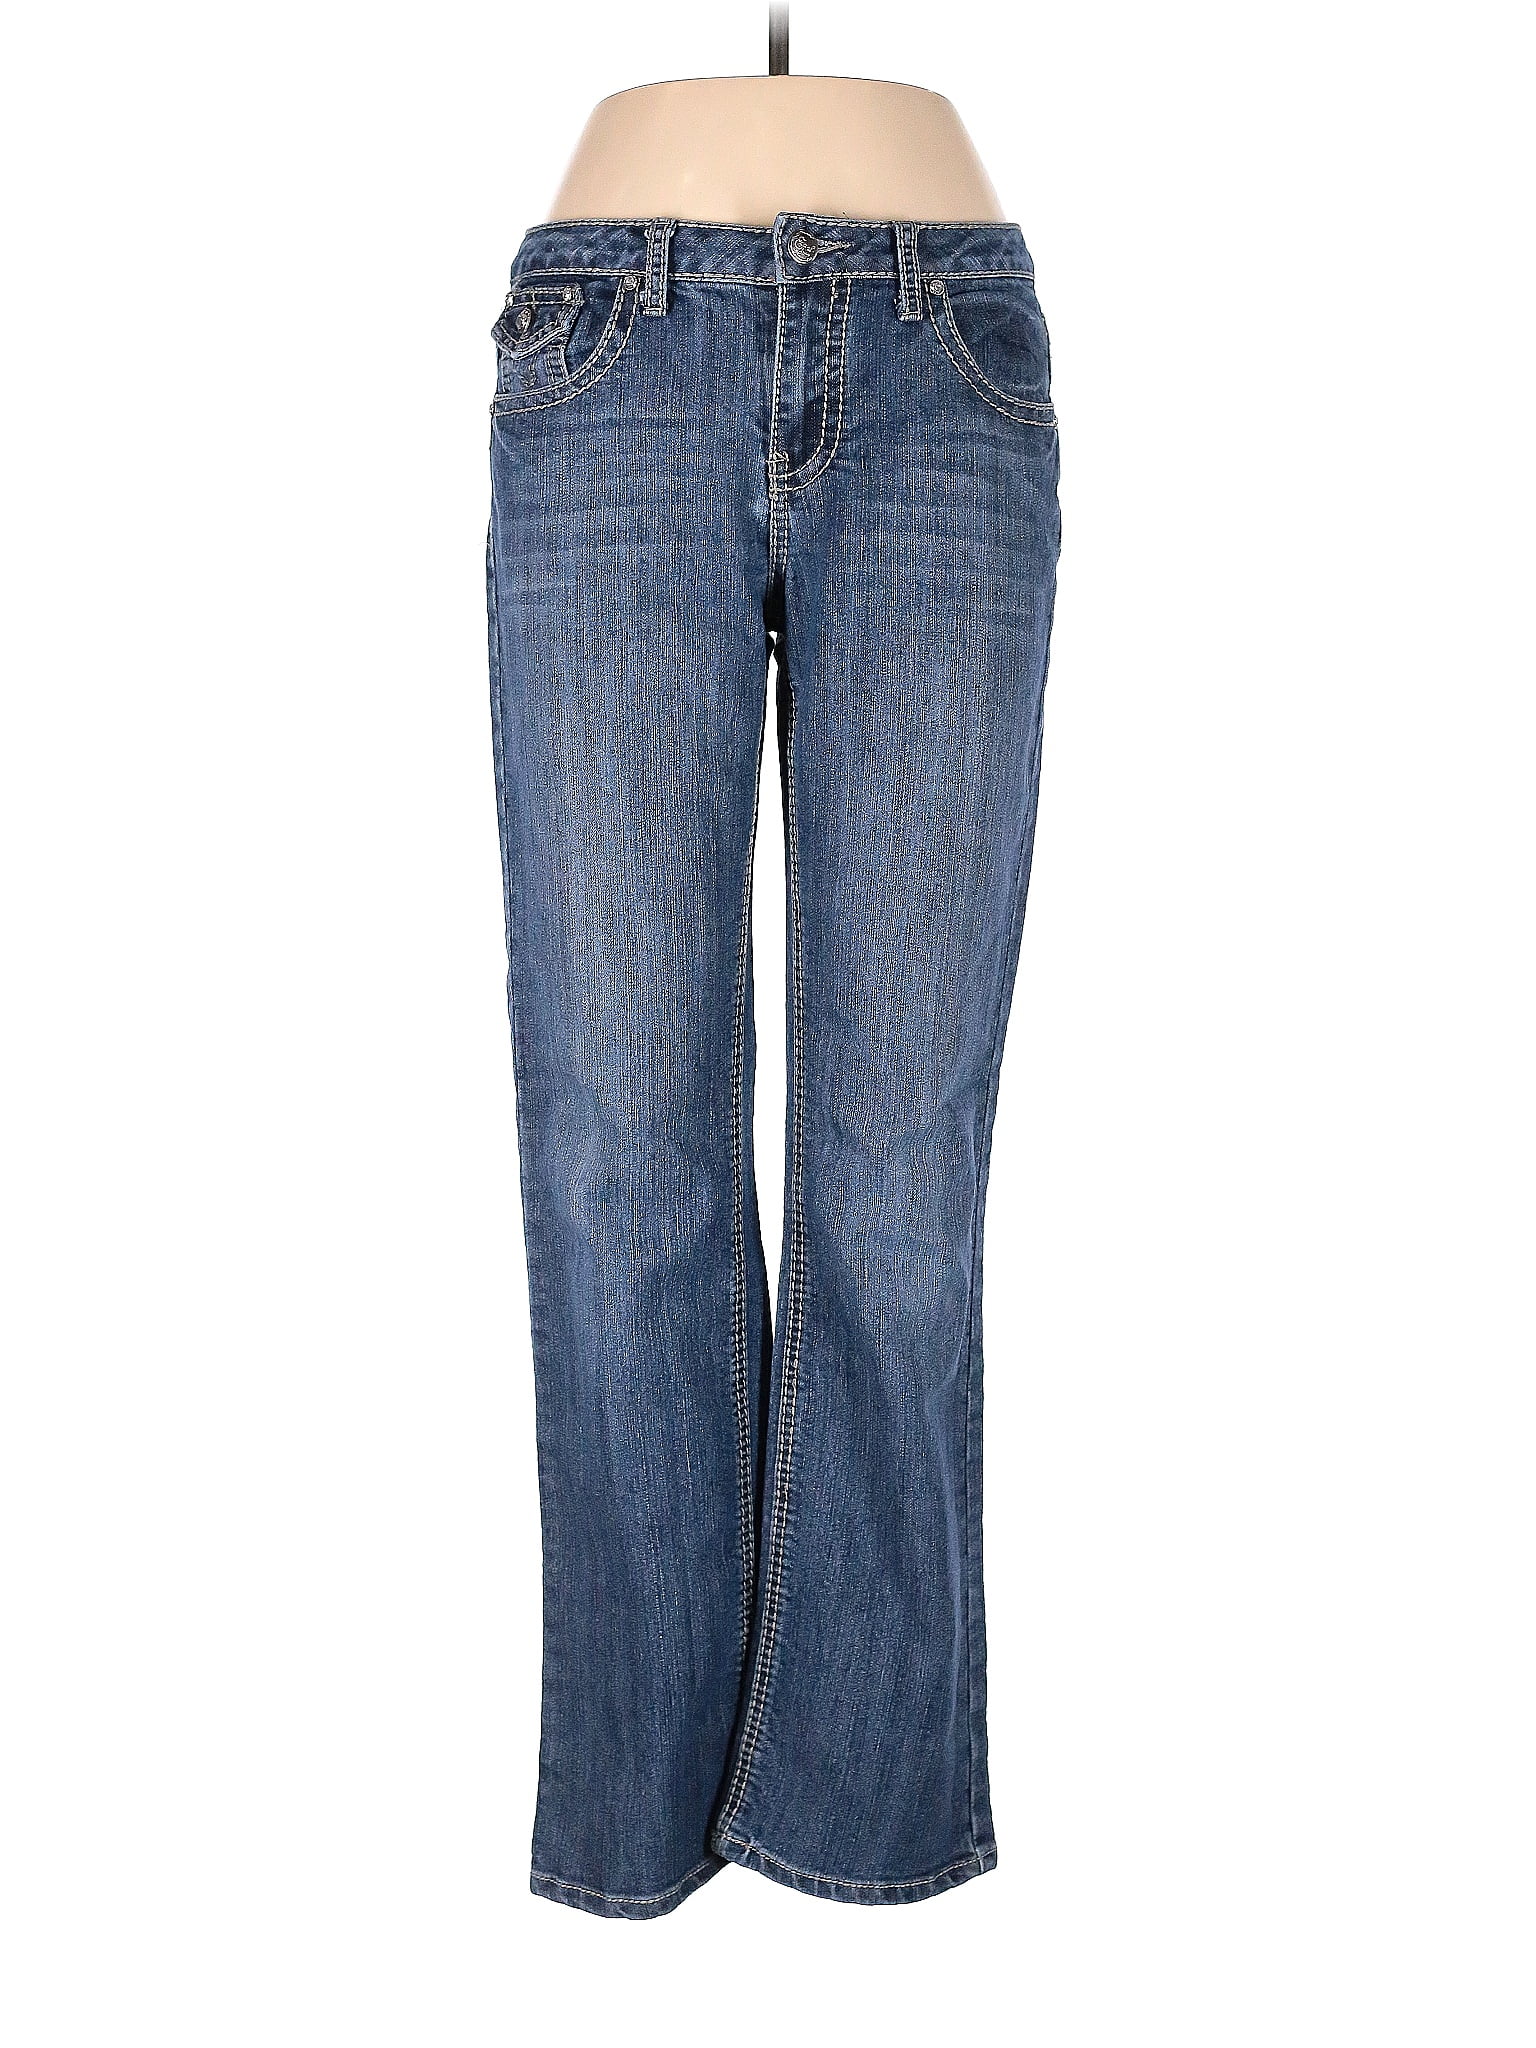 Earl Jean Solid Blue Jeans Size 8 - 70% off | thredUP